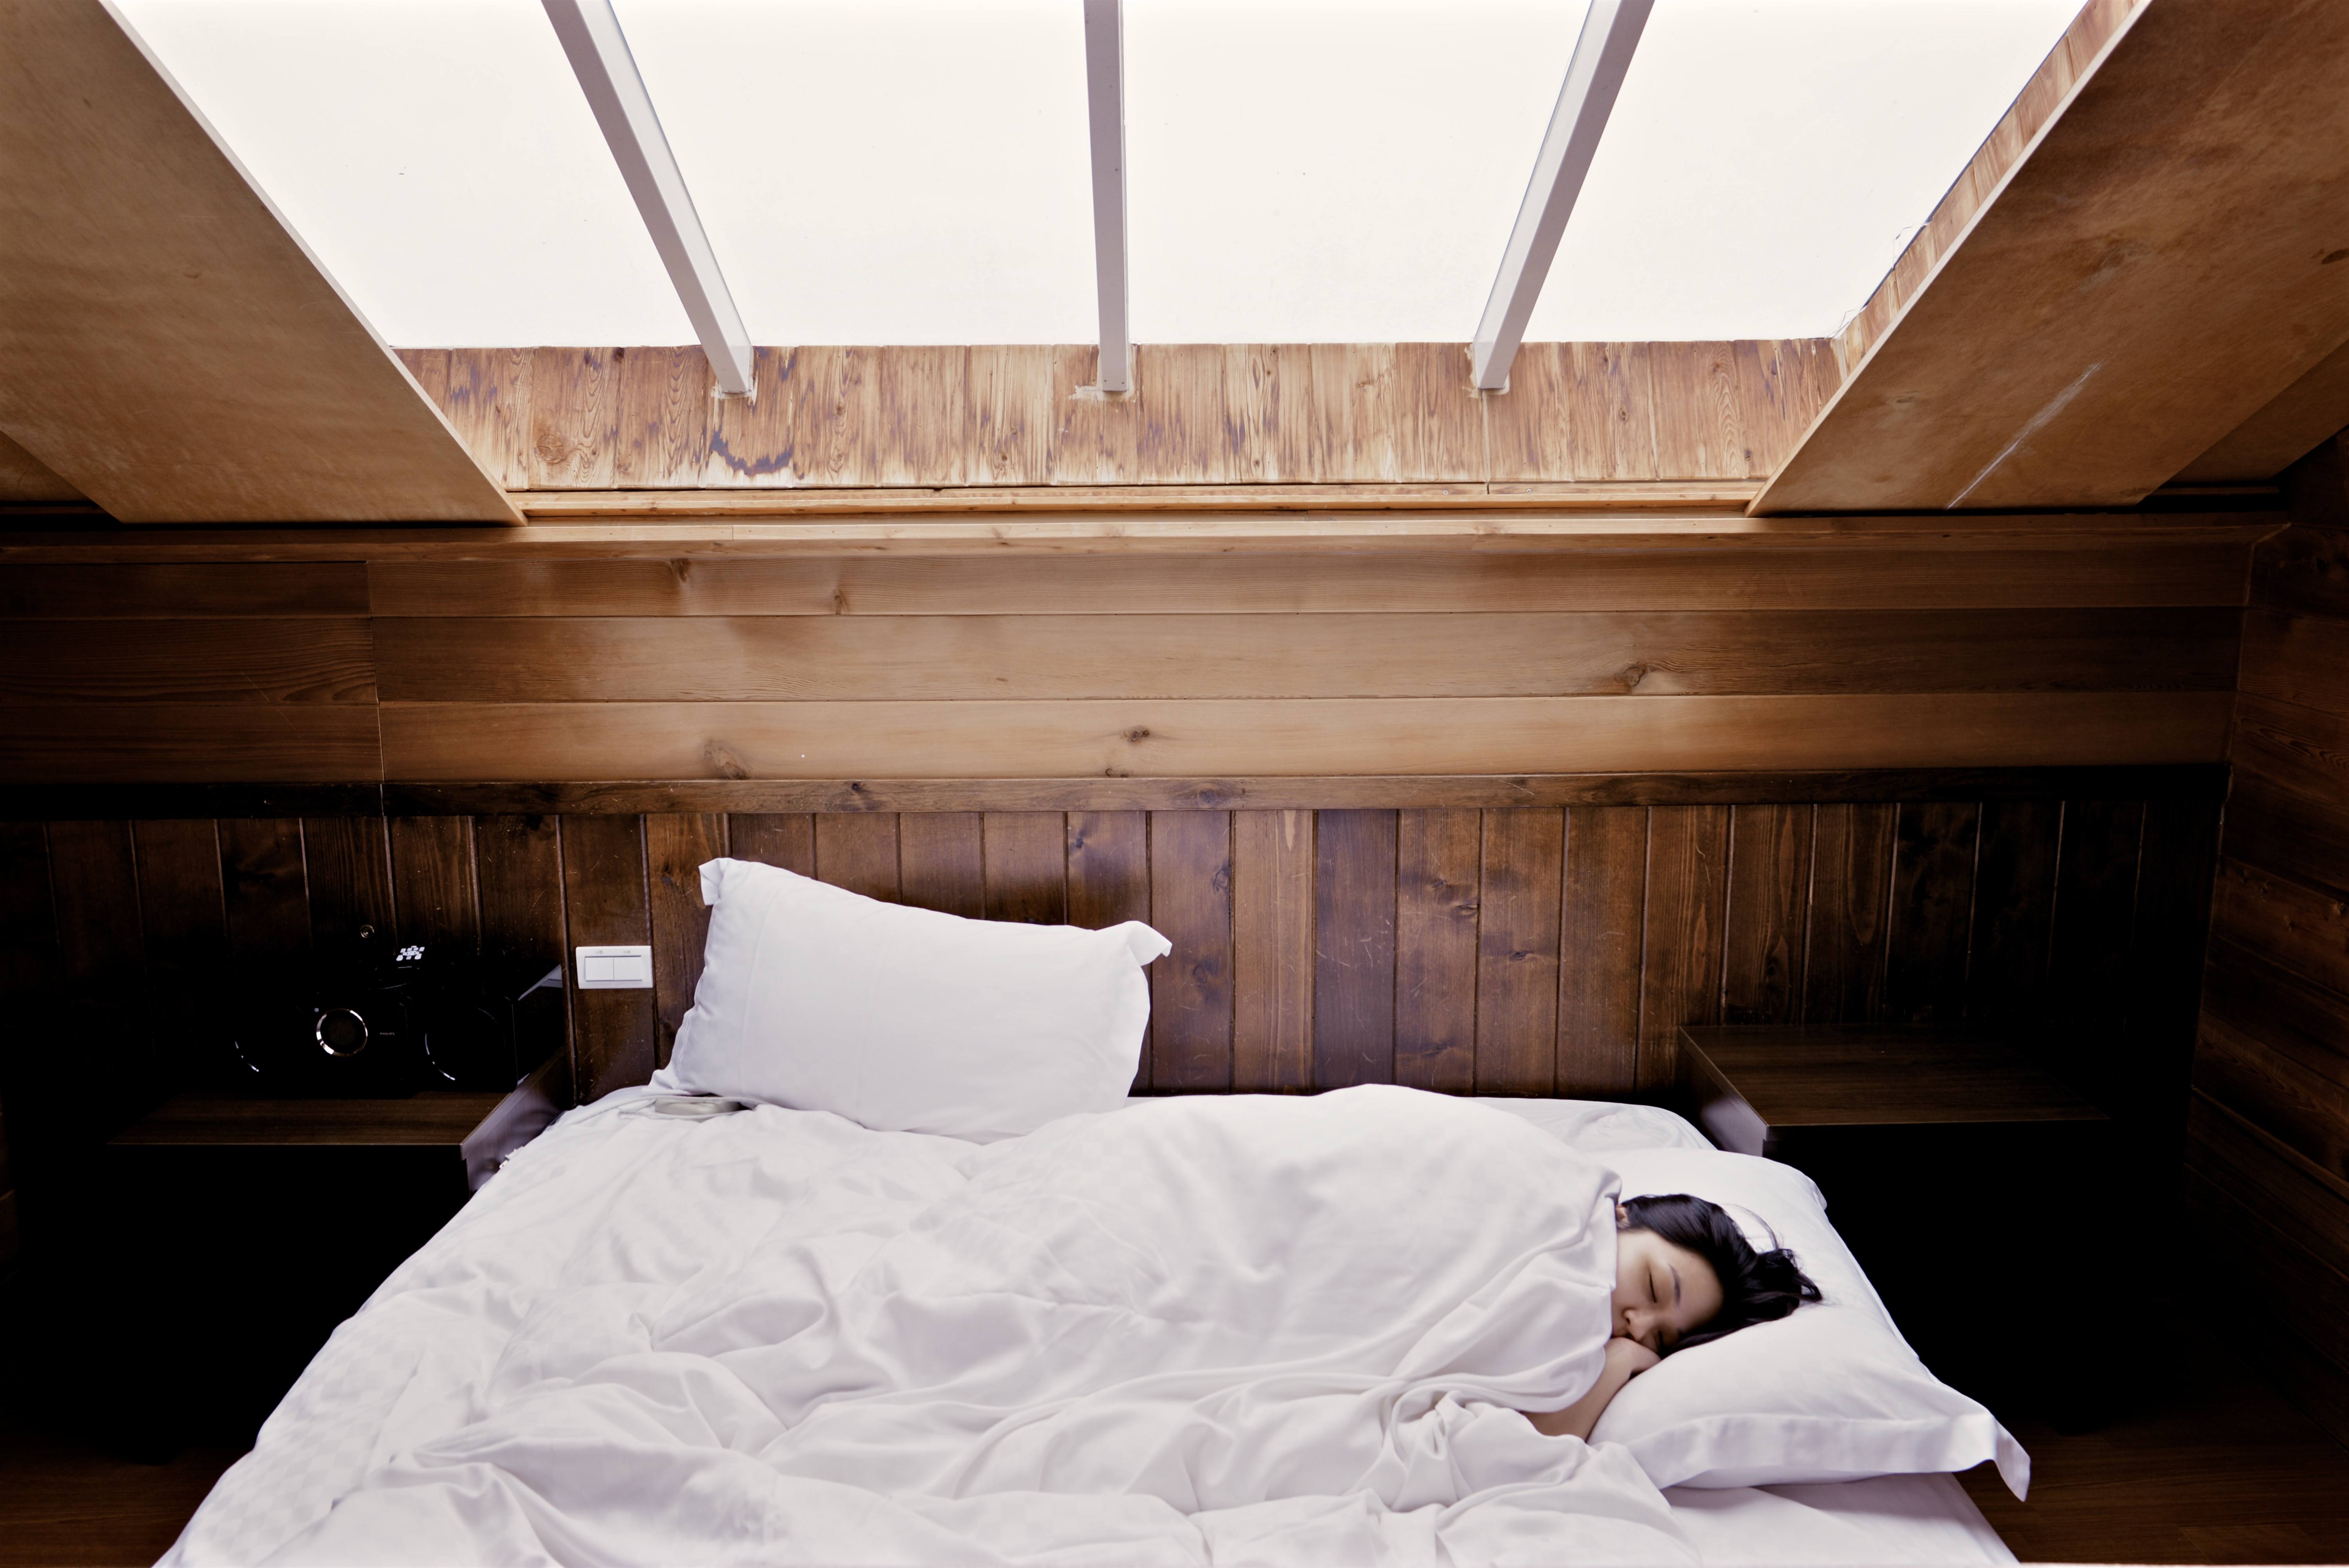 Benefit Your Sleep and Health by Sleeping with Air Conditioning